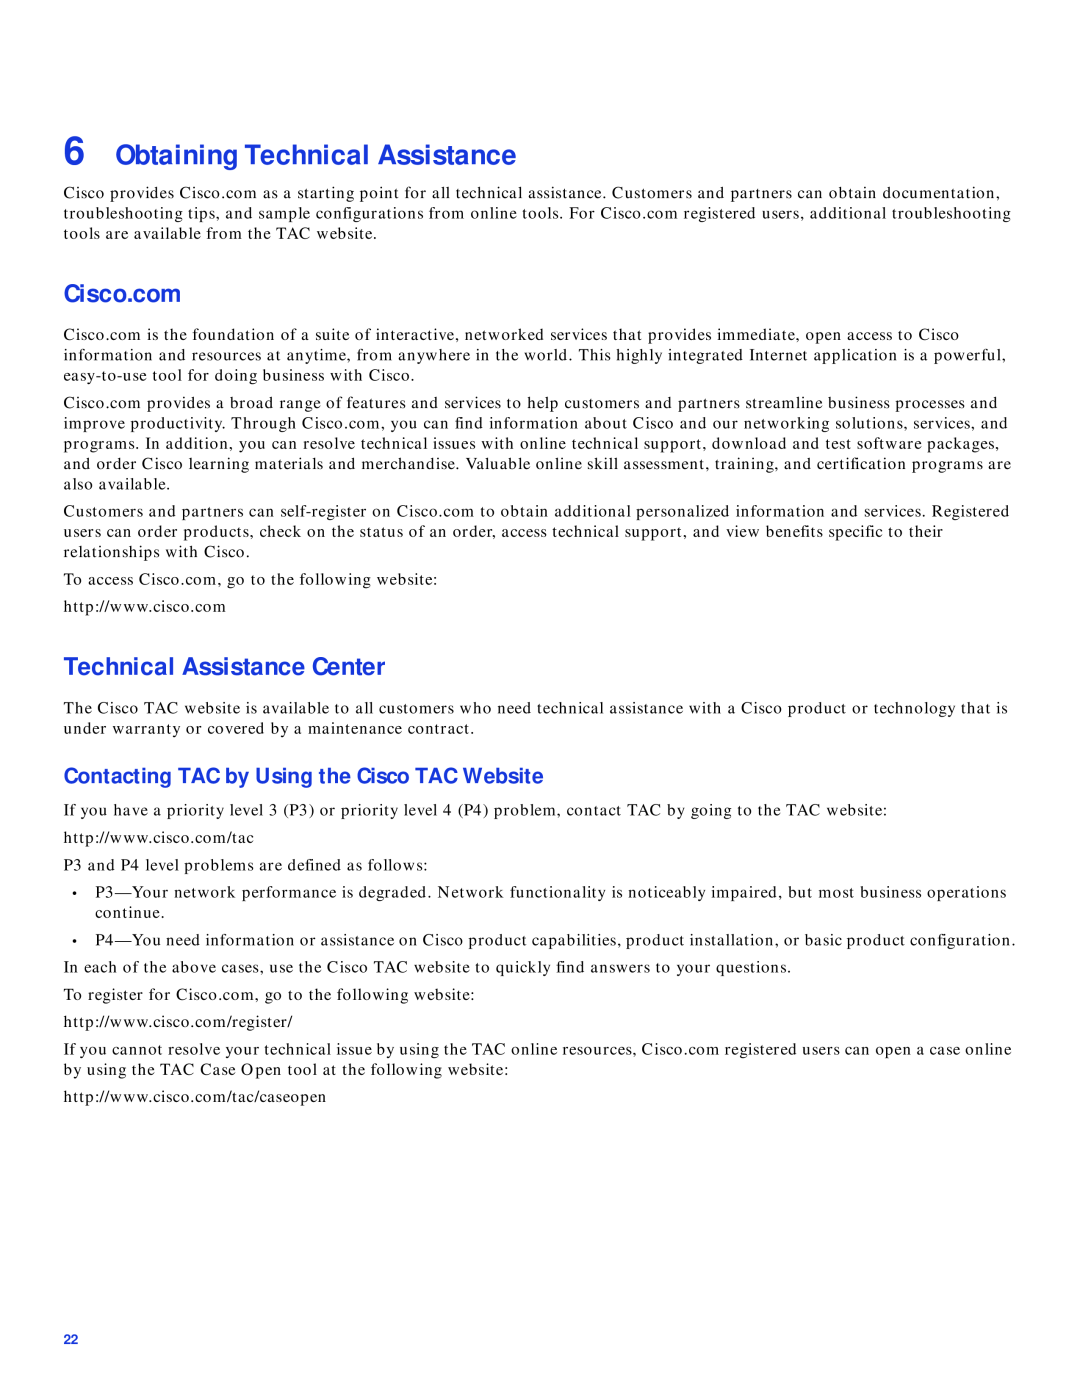 Cisco Systems AS5300 quick start Obtaining Technical Assistance, Cisco.com, Technical Assistance Center 